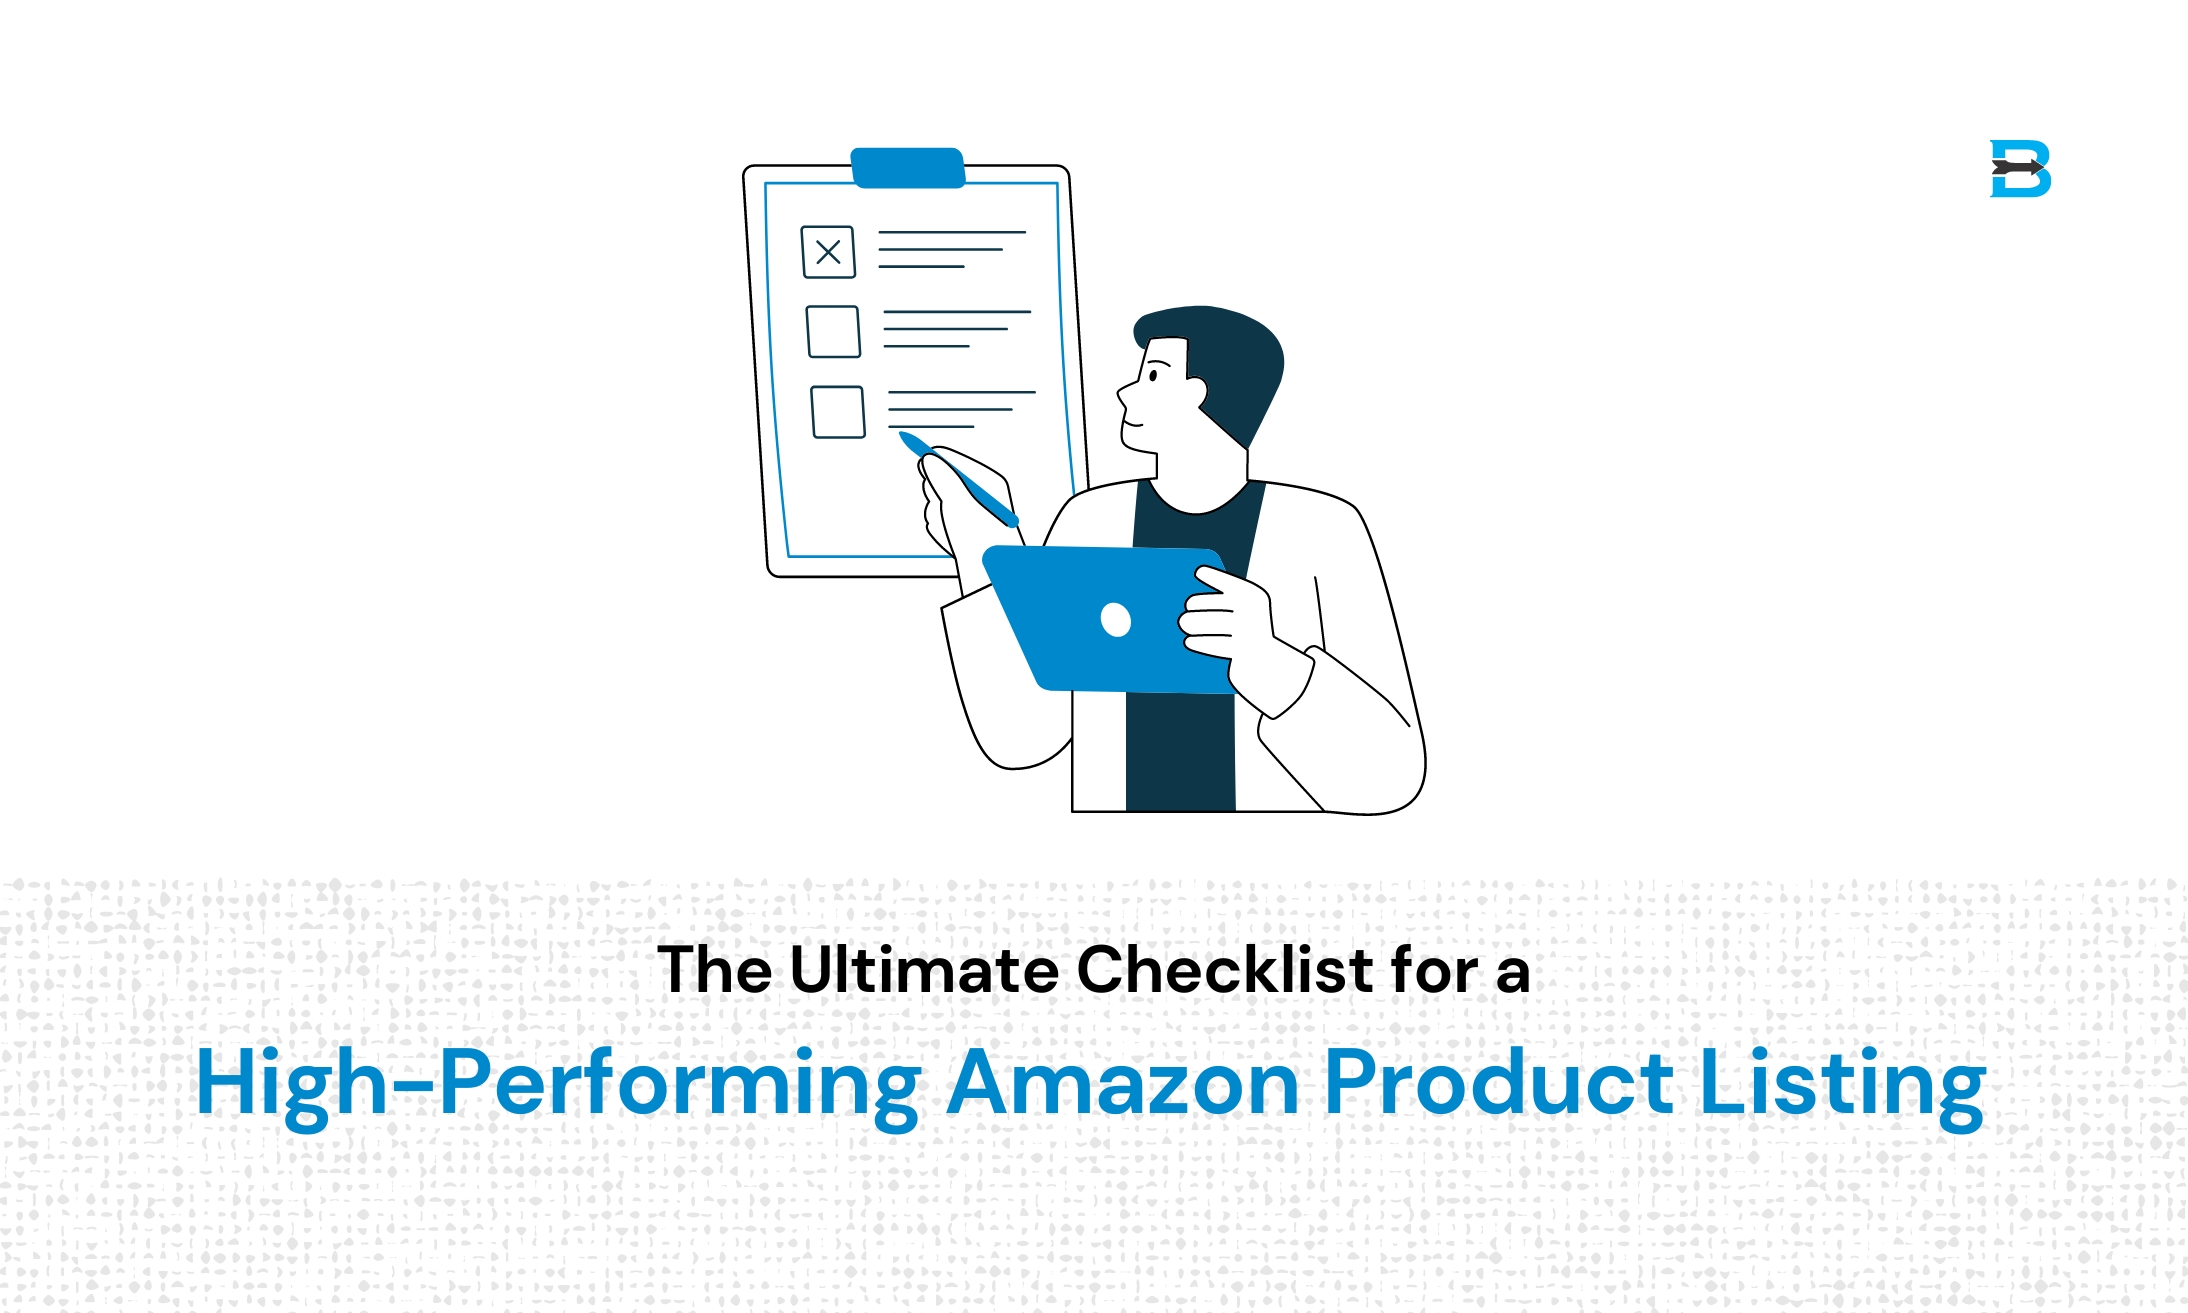 The Ultimate Checklist for a High-Performing Amazon Product Listing